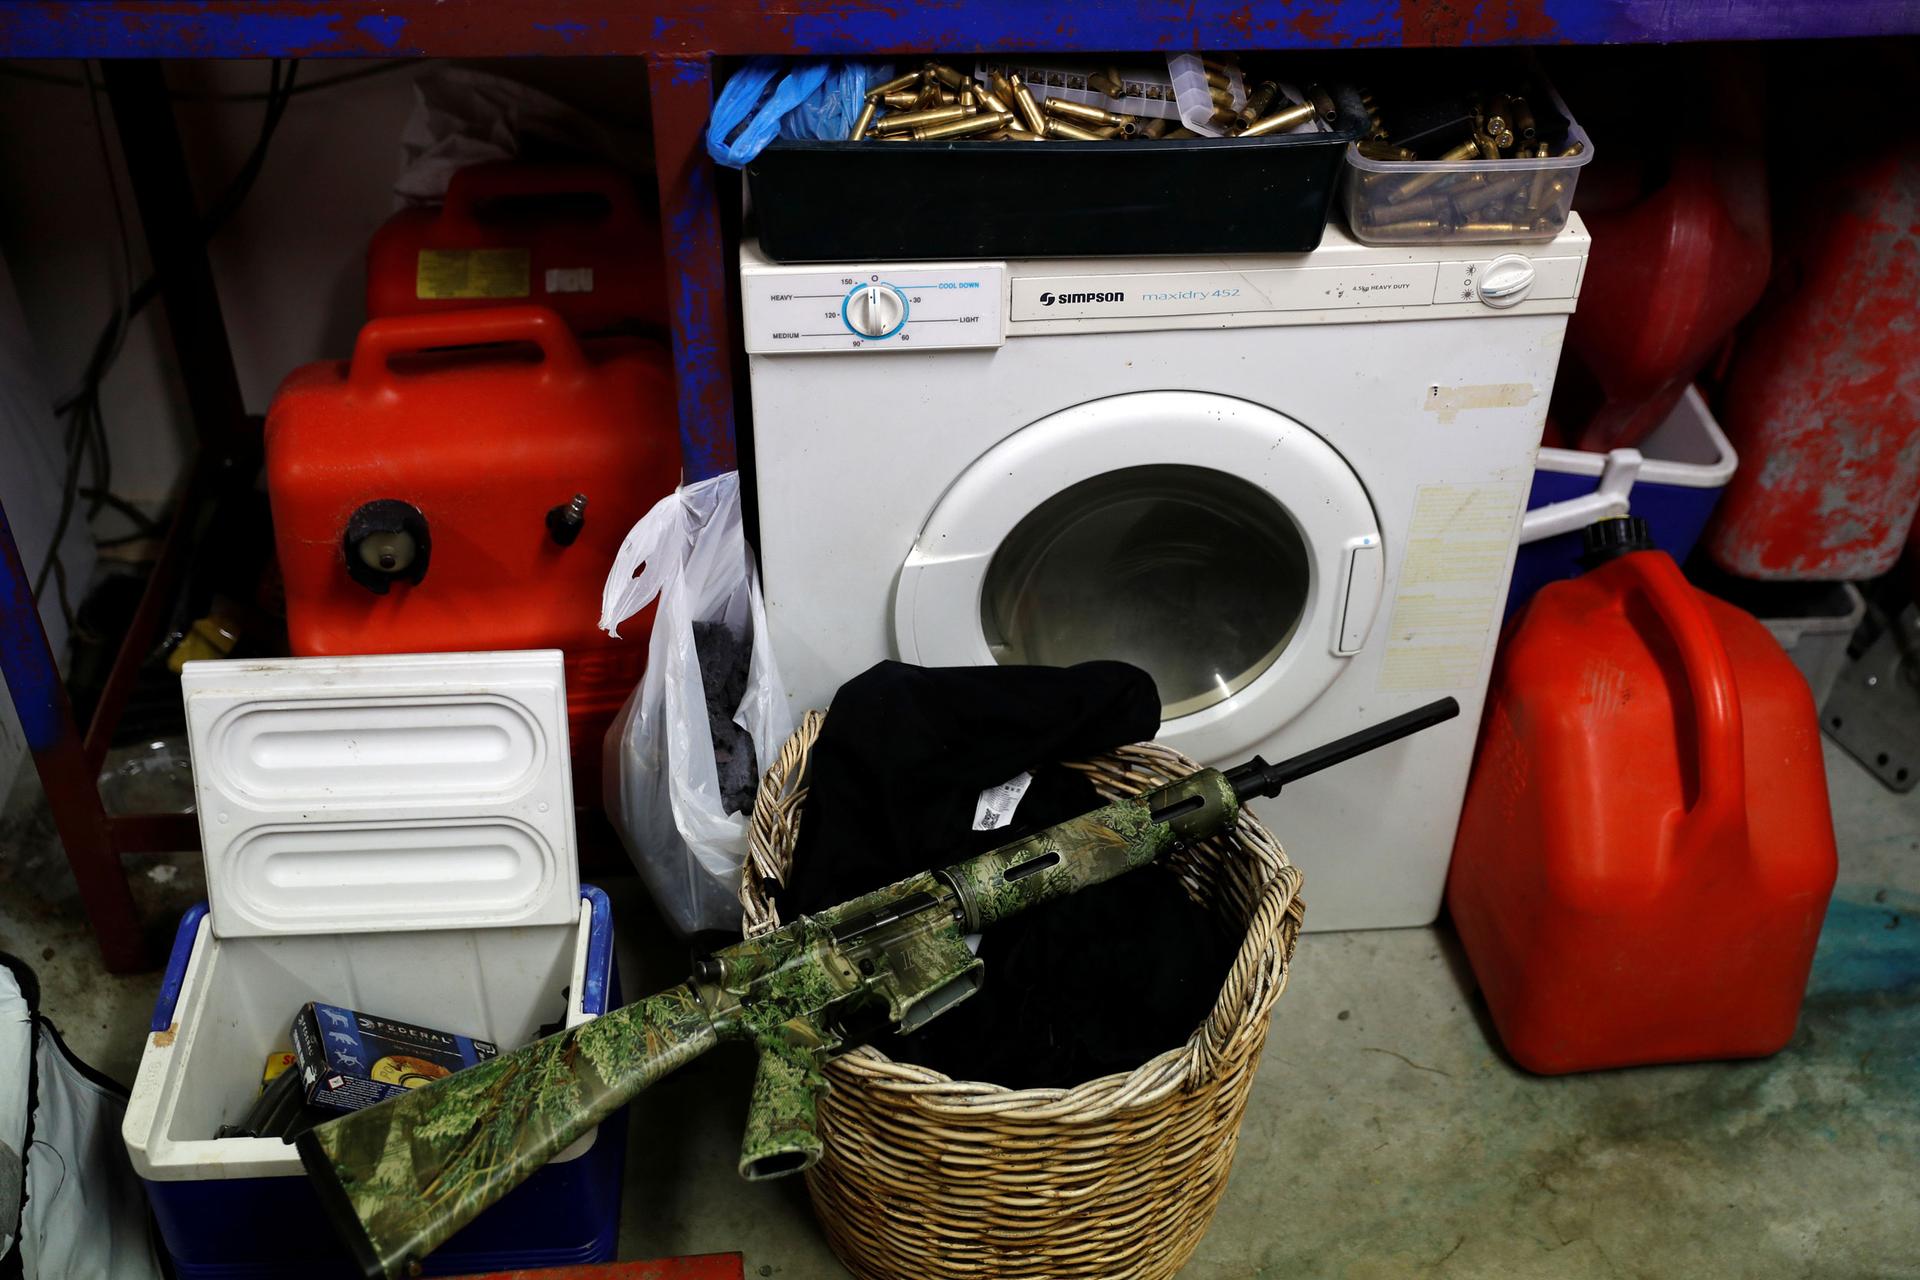 An AR-15 semi-automatic rifle is seen painted in camoflage and sitting on a laundry basket.